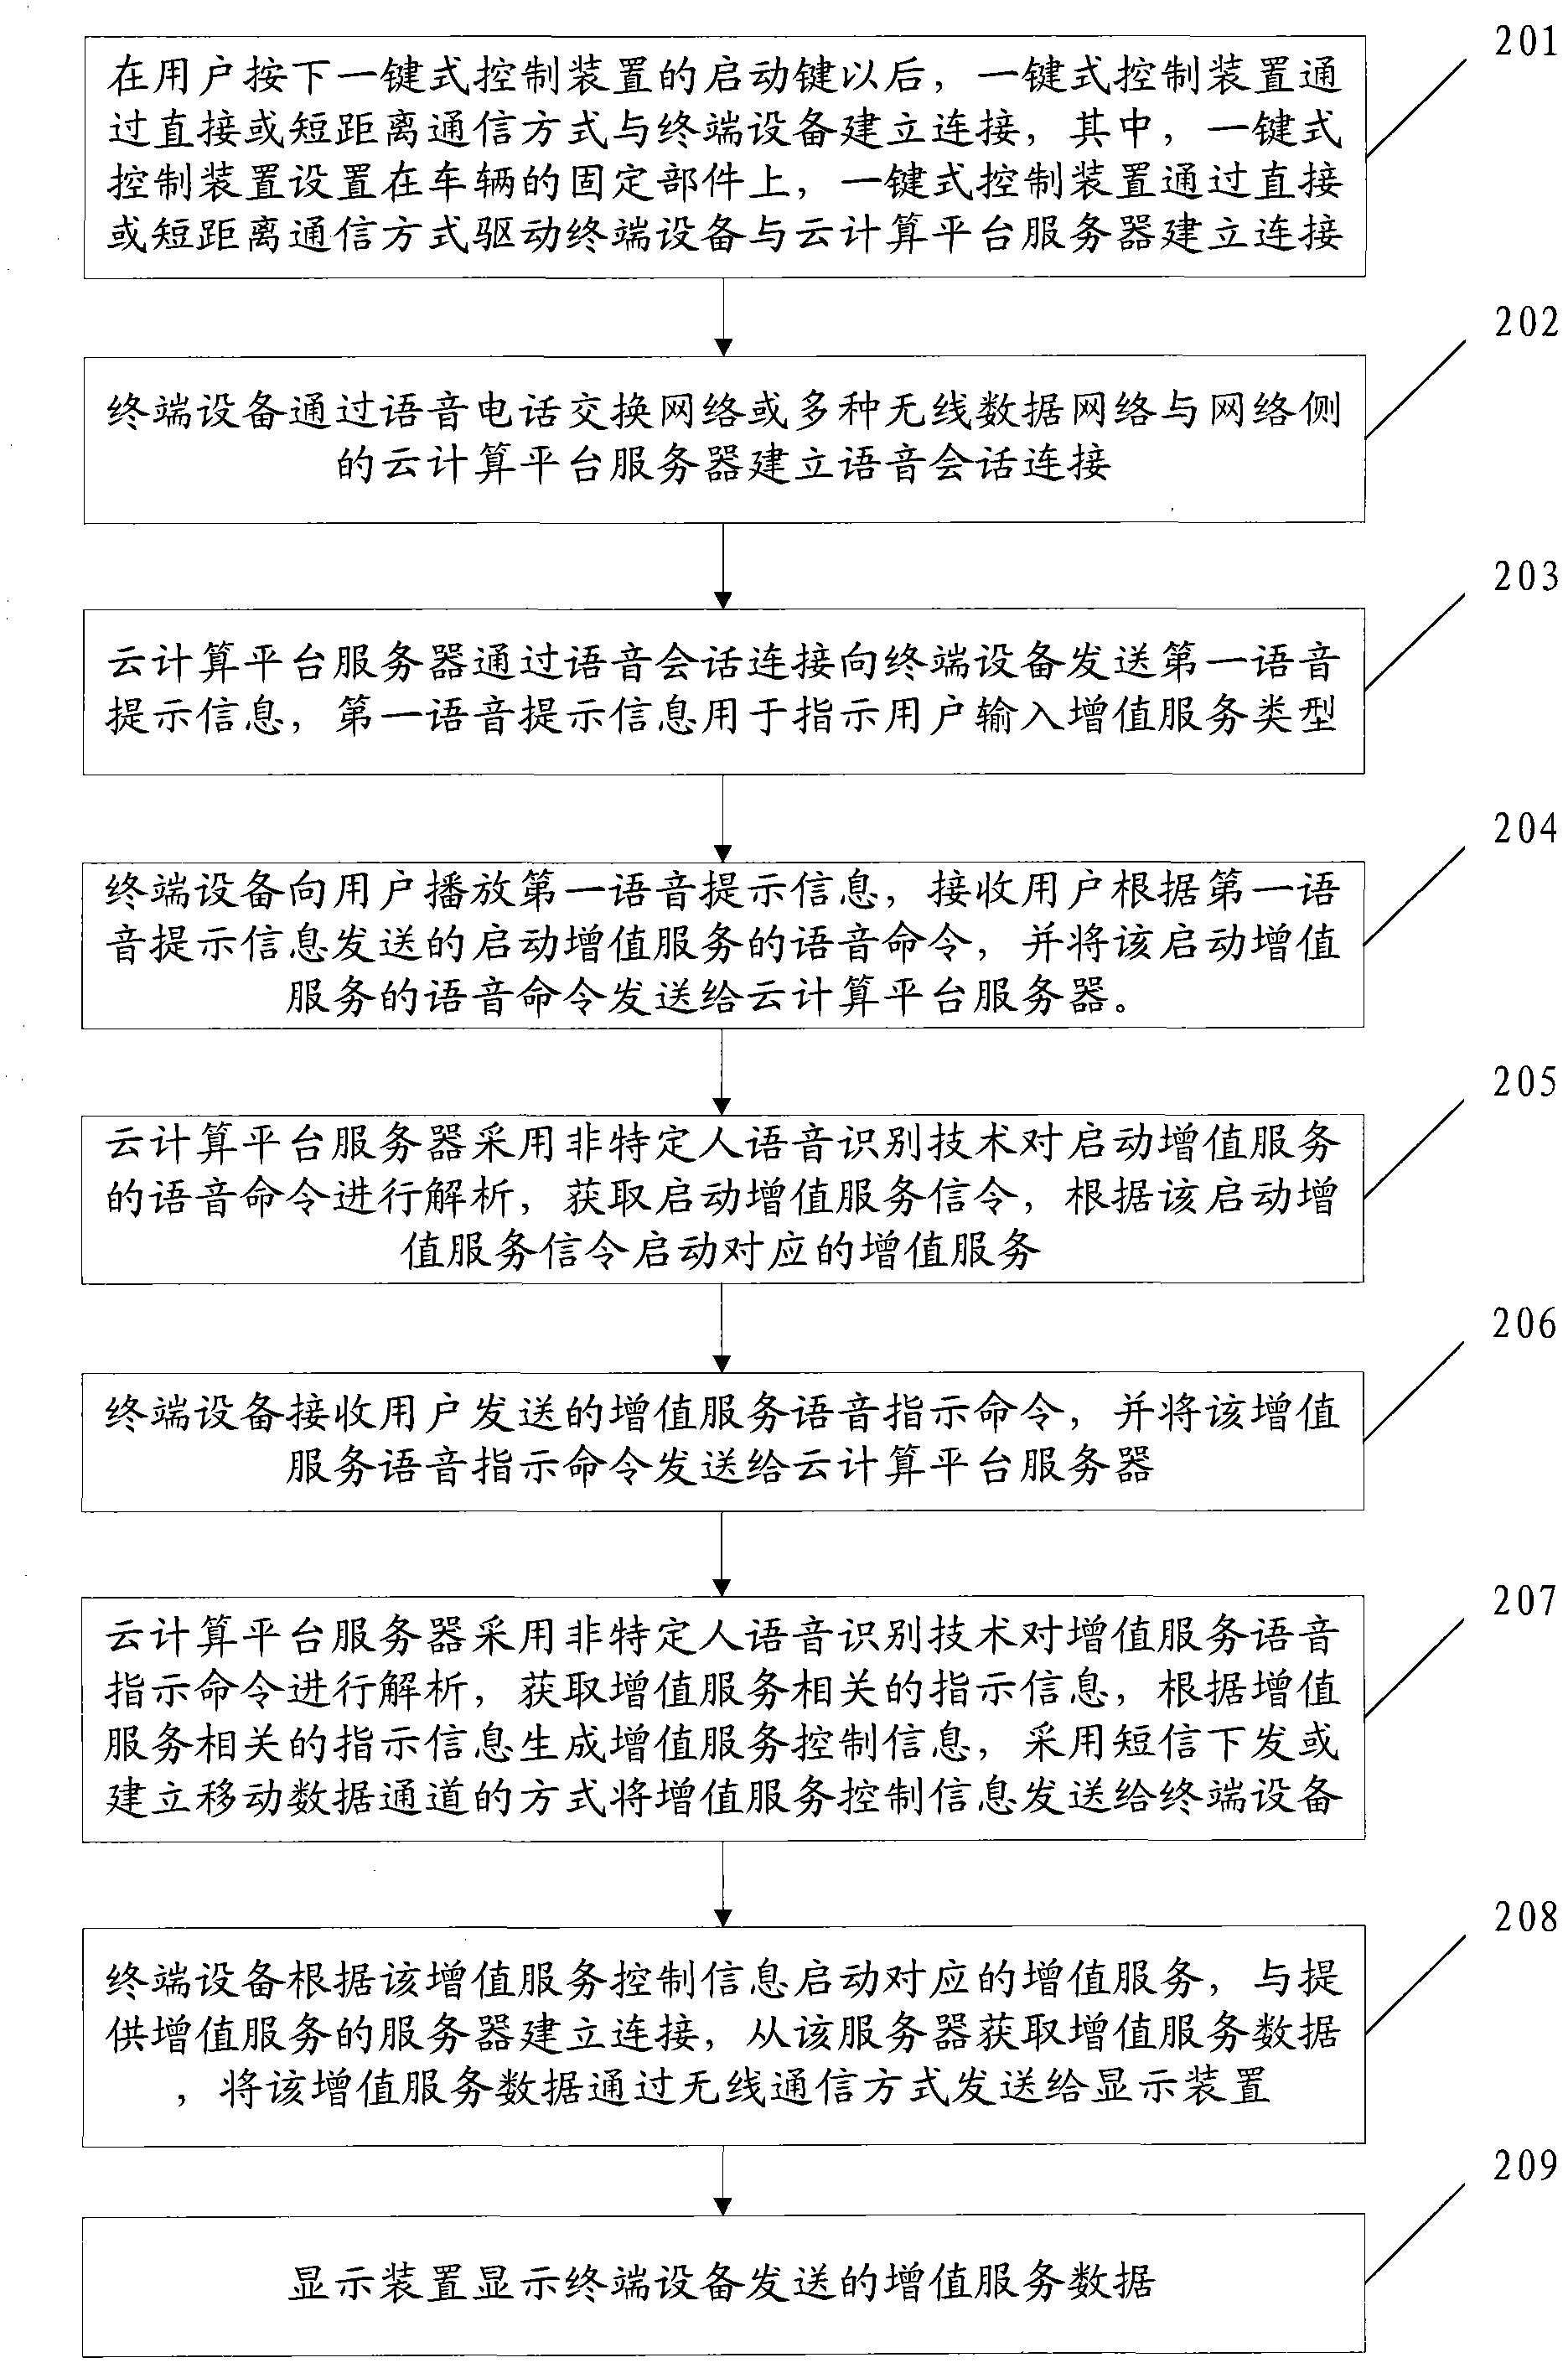 Vehicle-mounted service system and method based on voice command control